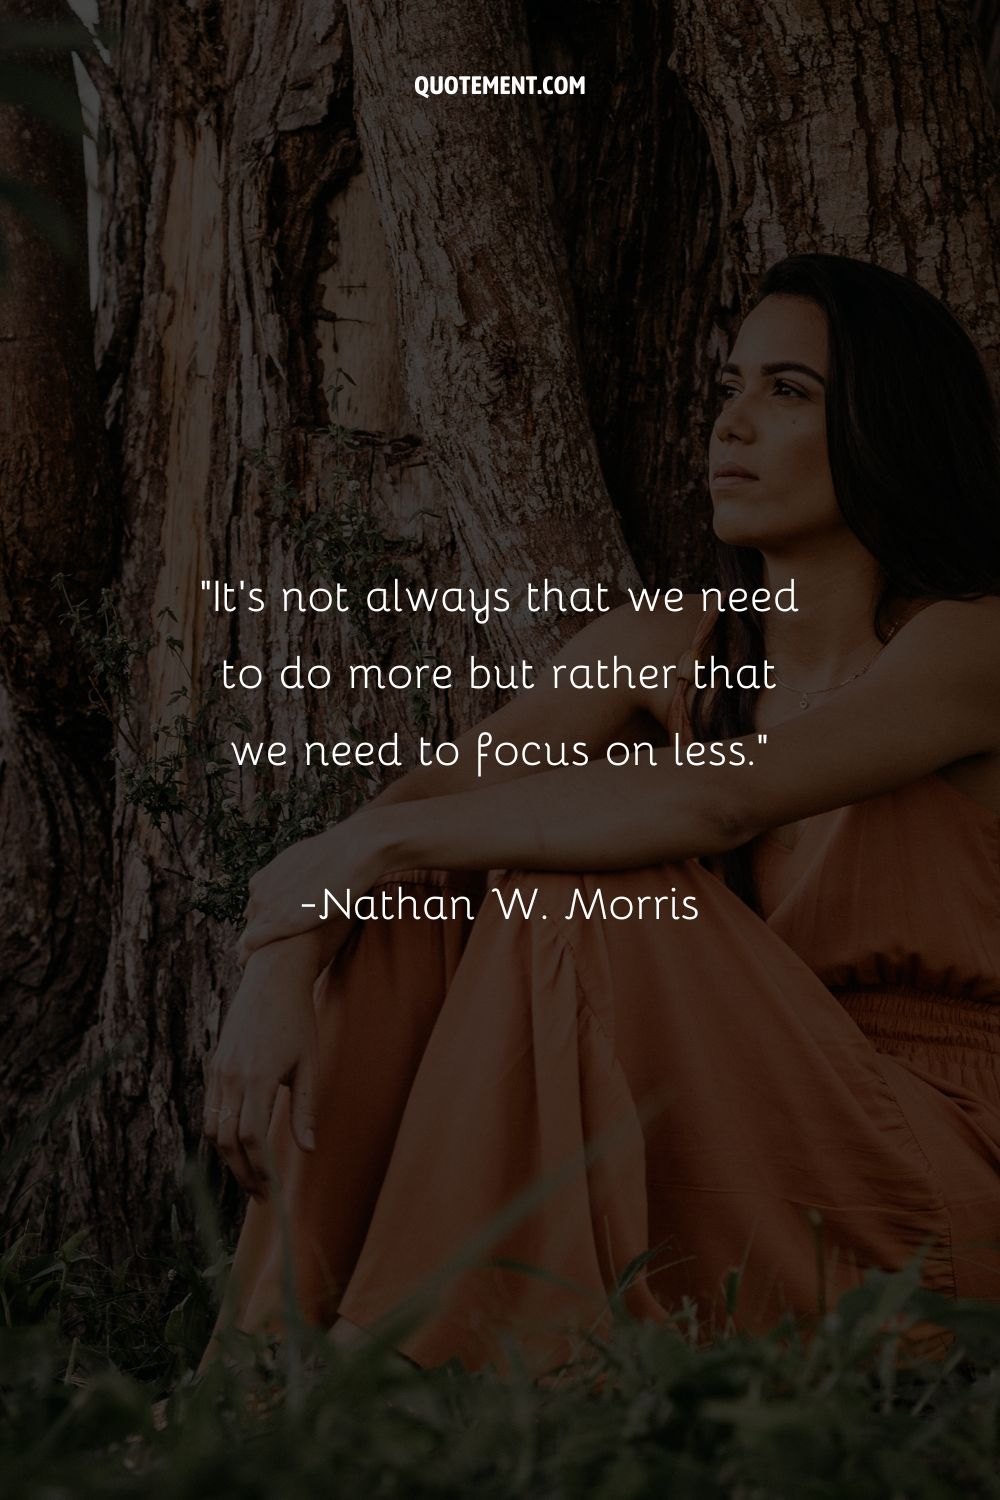 It's not always that we need to do more but rather that we need to focus on less.